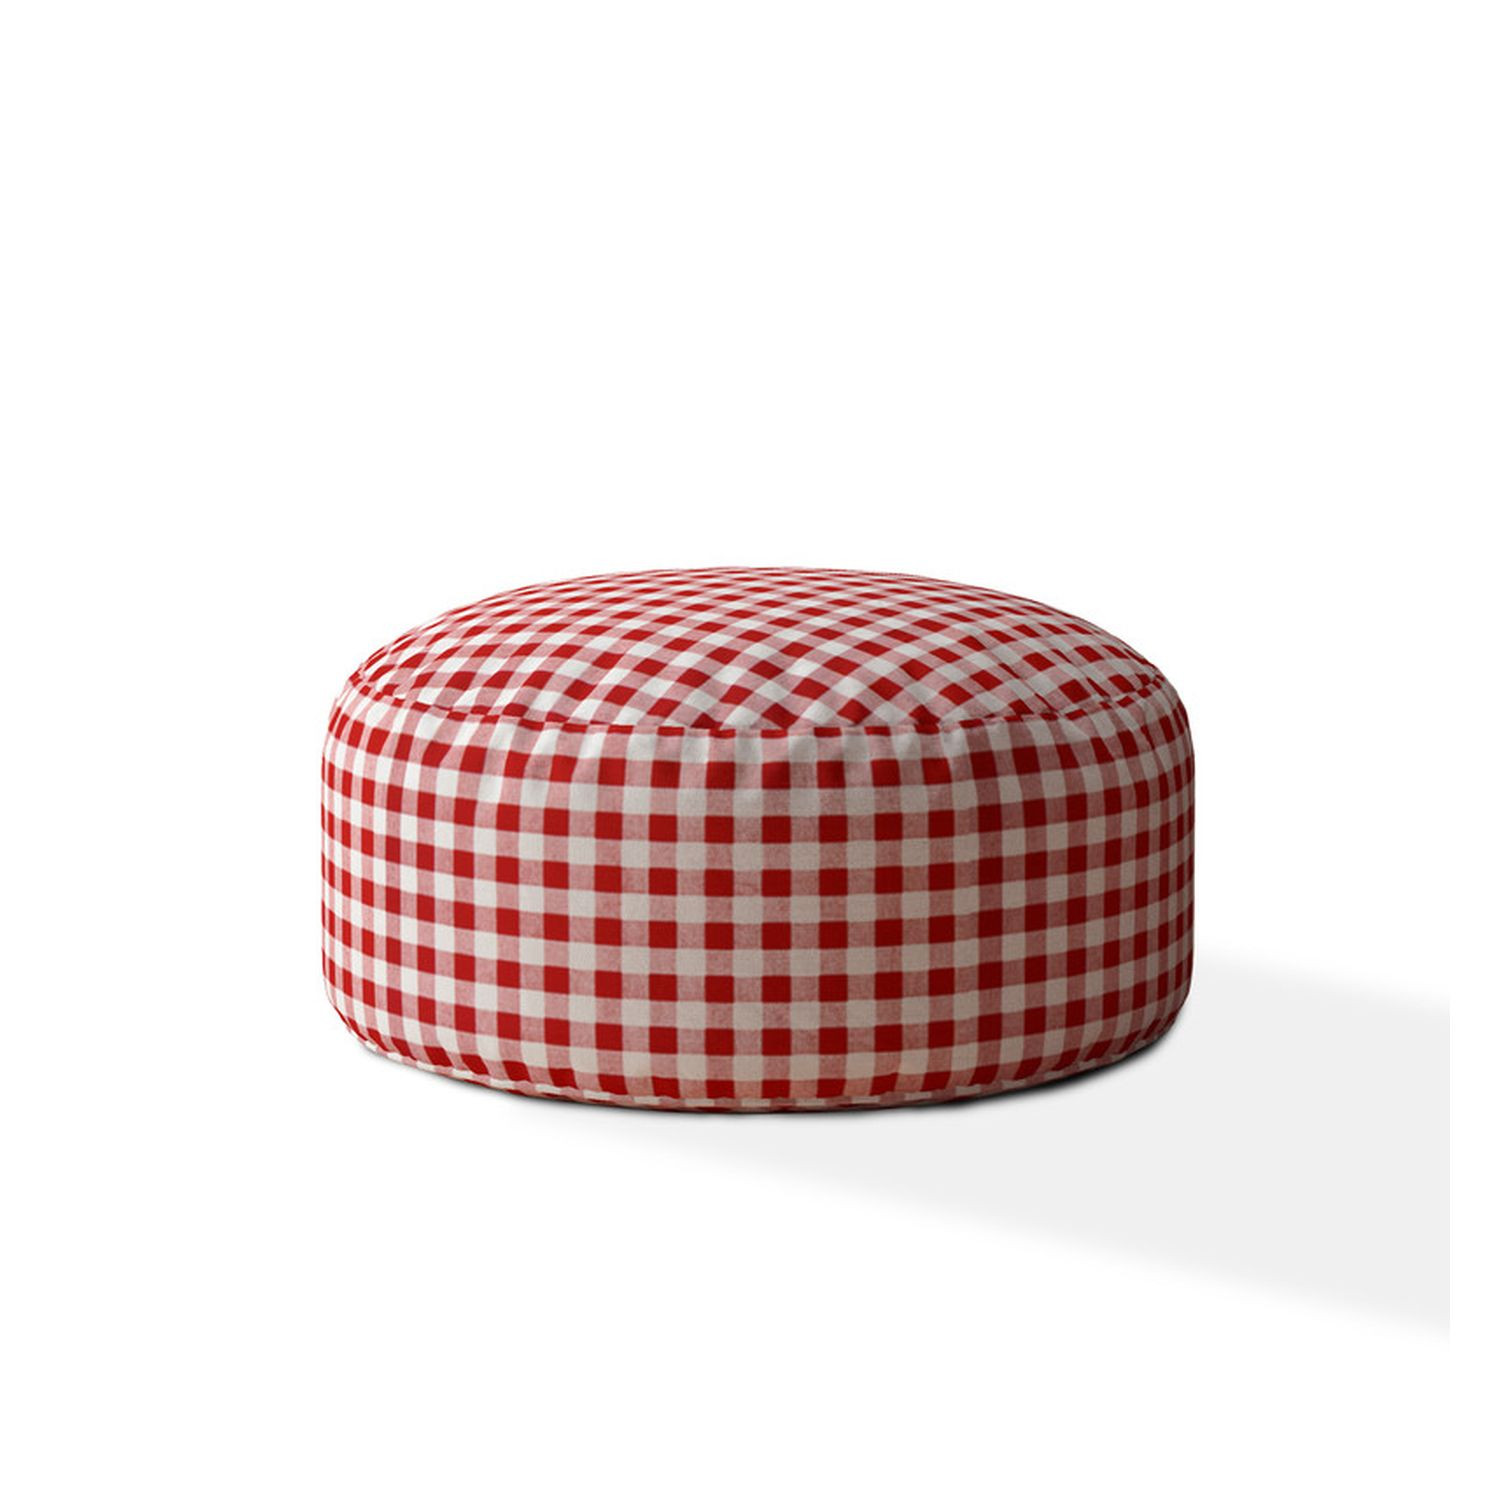 24" Red And White Cotton Round Gingham Pouf Ottoman-518334-1